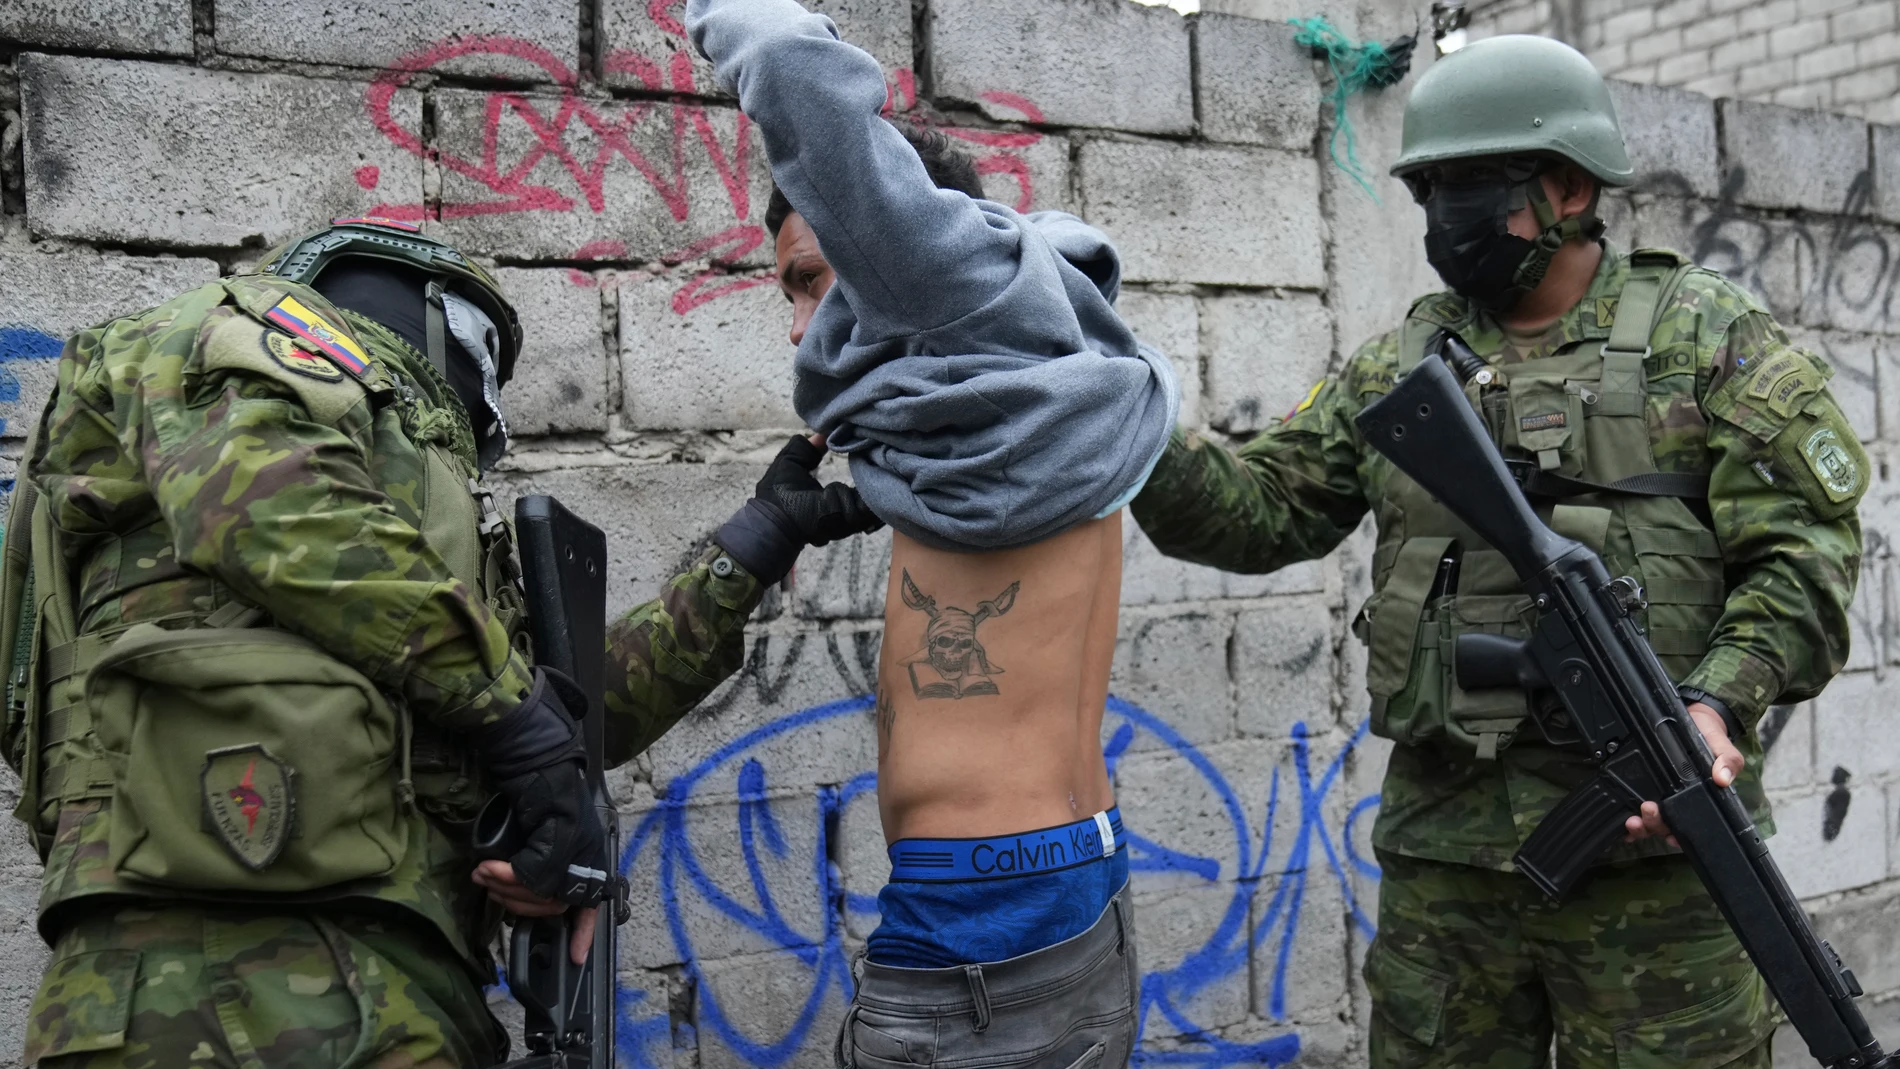 Soldiers briefly detain a youth to check if he has gang-related tattoos as they patrol the south side of Quito, Ecuador, Friday, Jan. 12, 2024, in the wake of the apparent escape of a powerful gang leader from prison. President Daniel Noboa decreed Monday a national state of emergency, a measure that lets authorities suspend people’s rights and mobilize the military. (AP Photo/Dolores Ochoa)